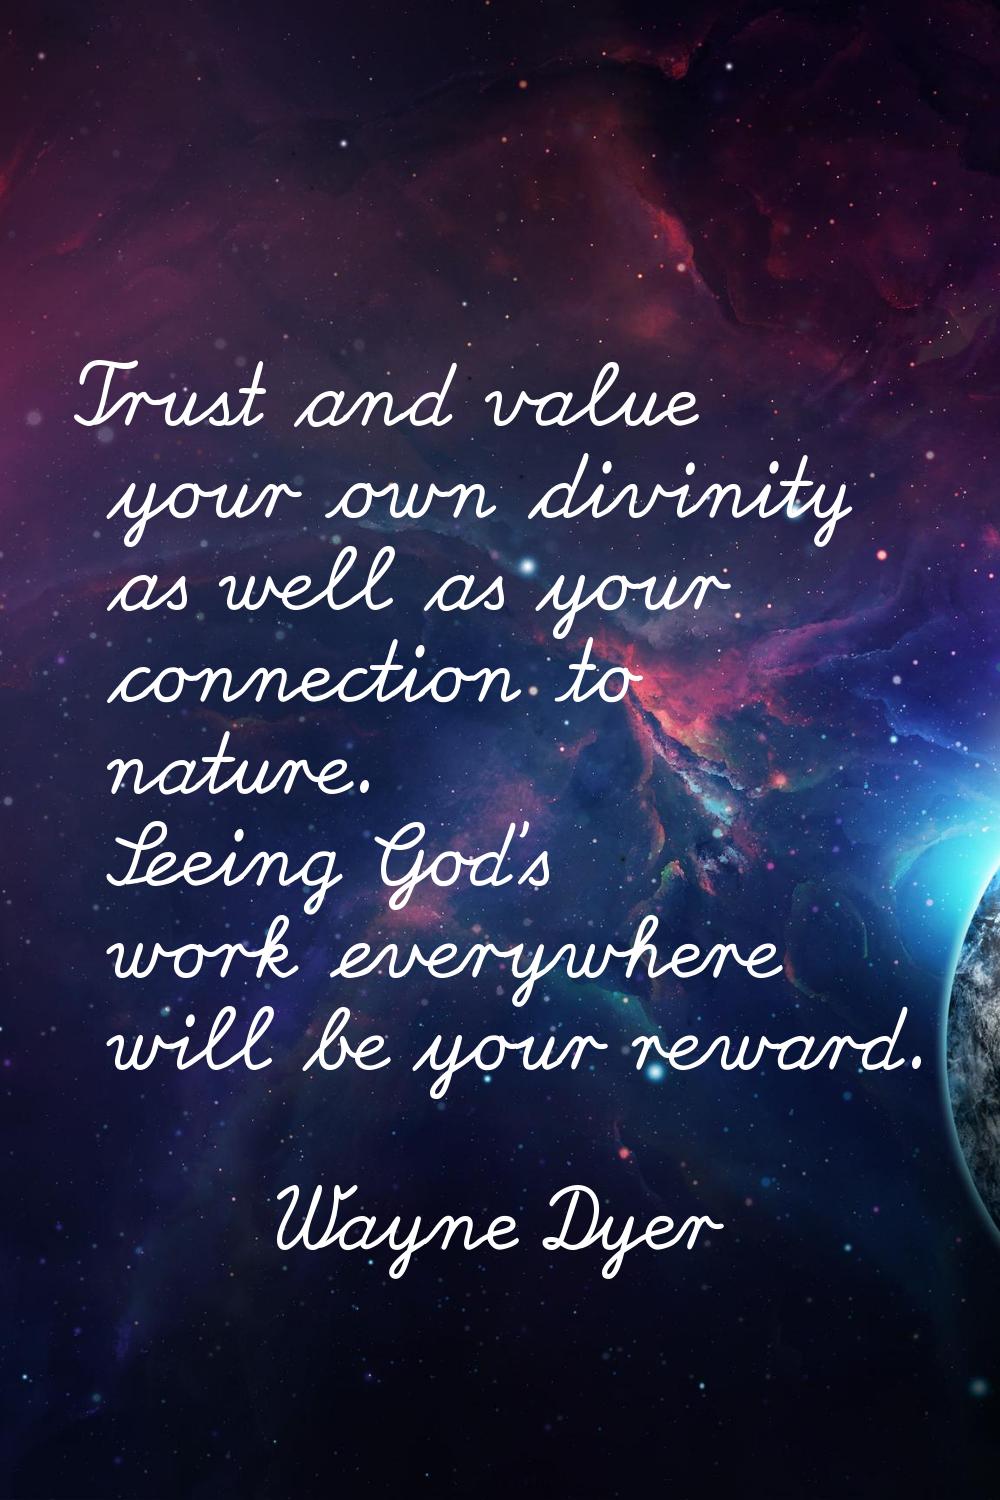 Trust and value your own divinity as well as your connection to nature. Seeing God's work everywher